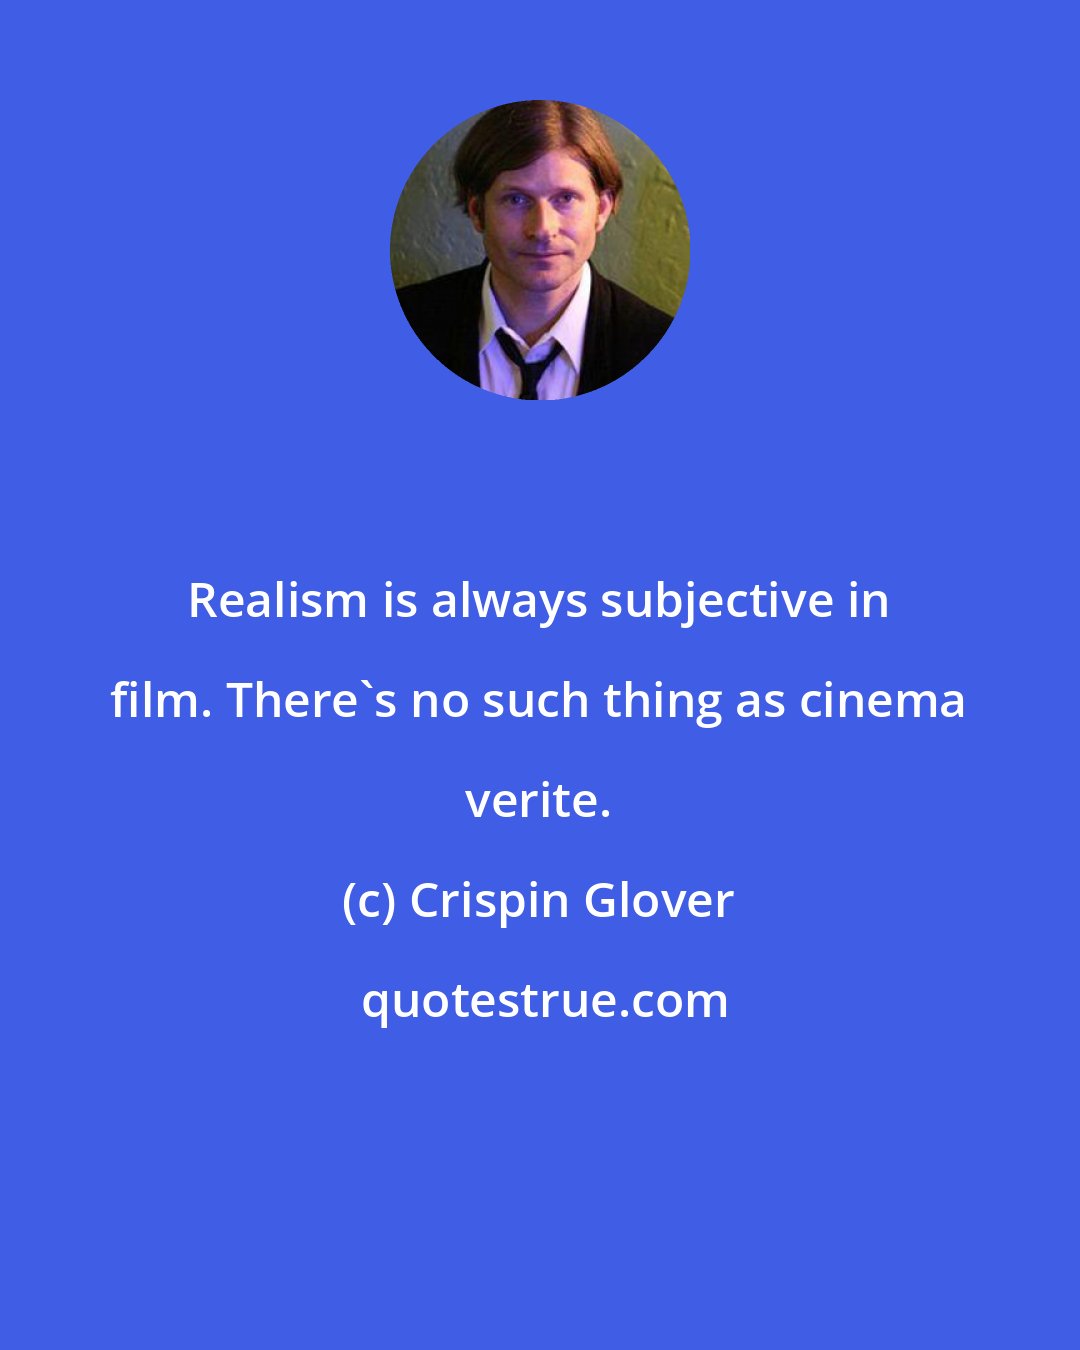 Crispin Glover: Realism is always subjective in film. There's no such thing as cinema verite.